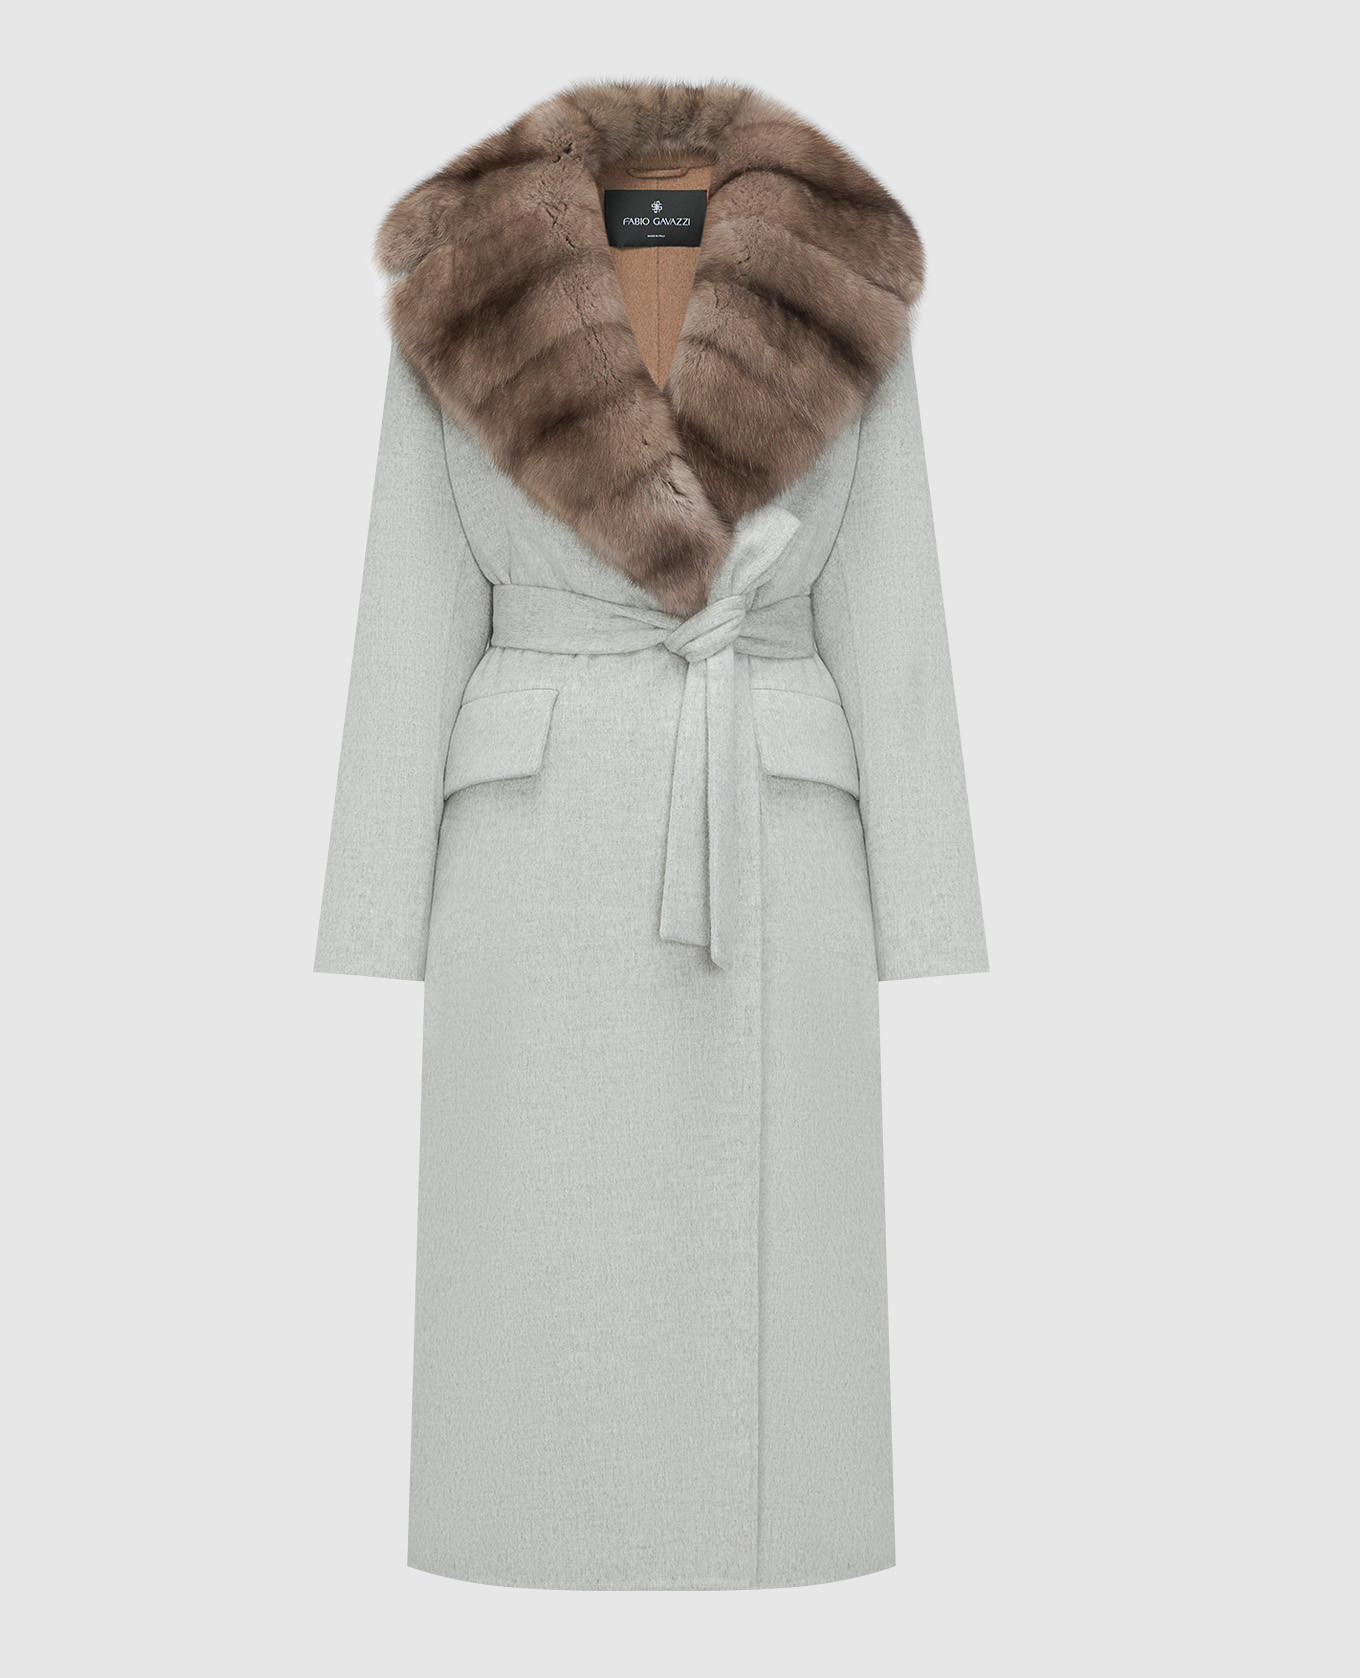 Gray cashmere coat with sable fur